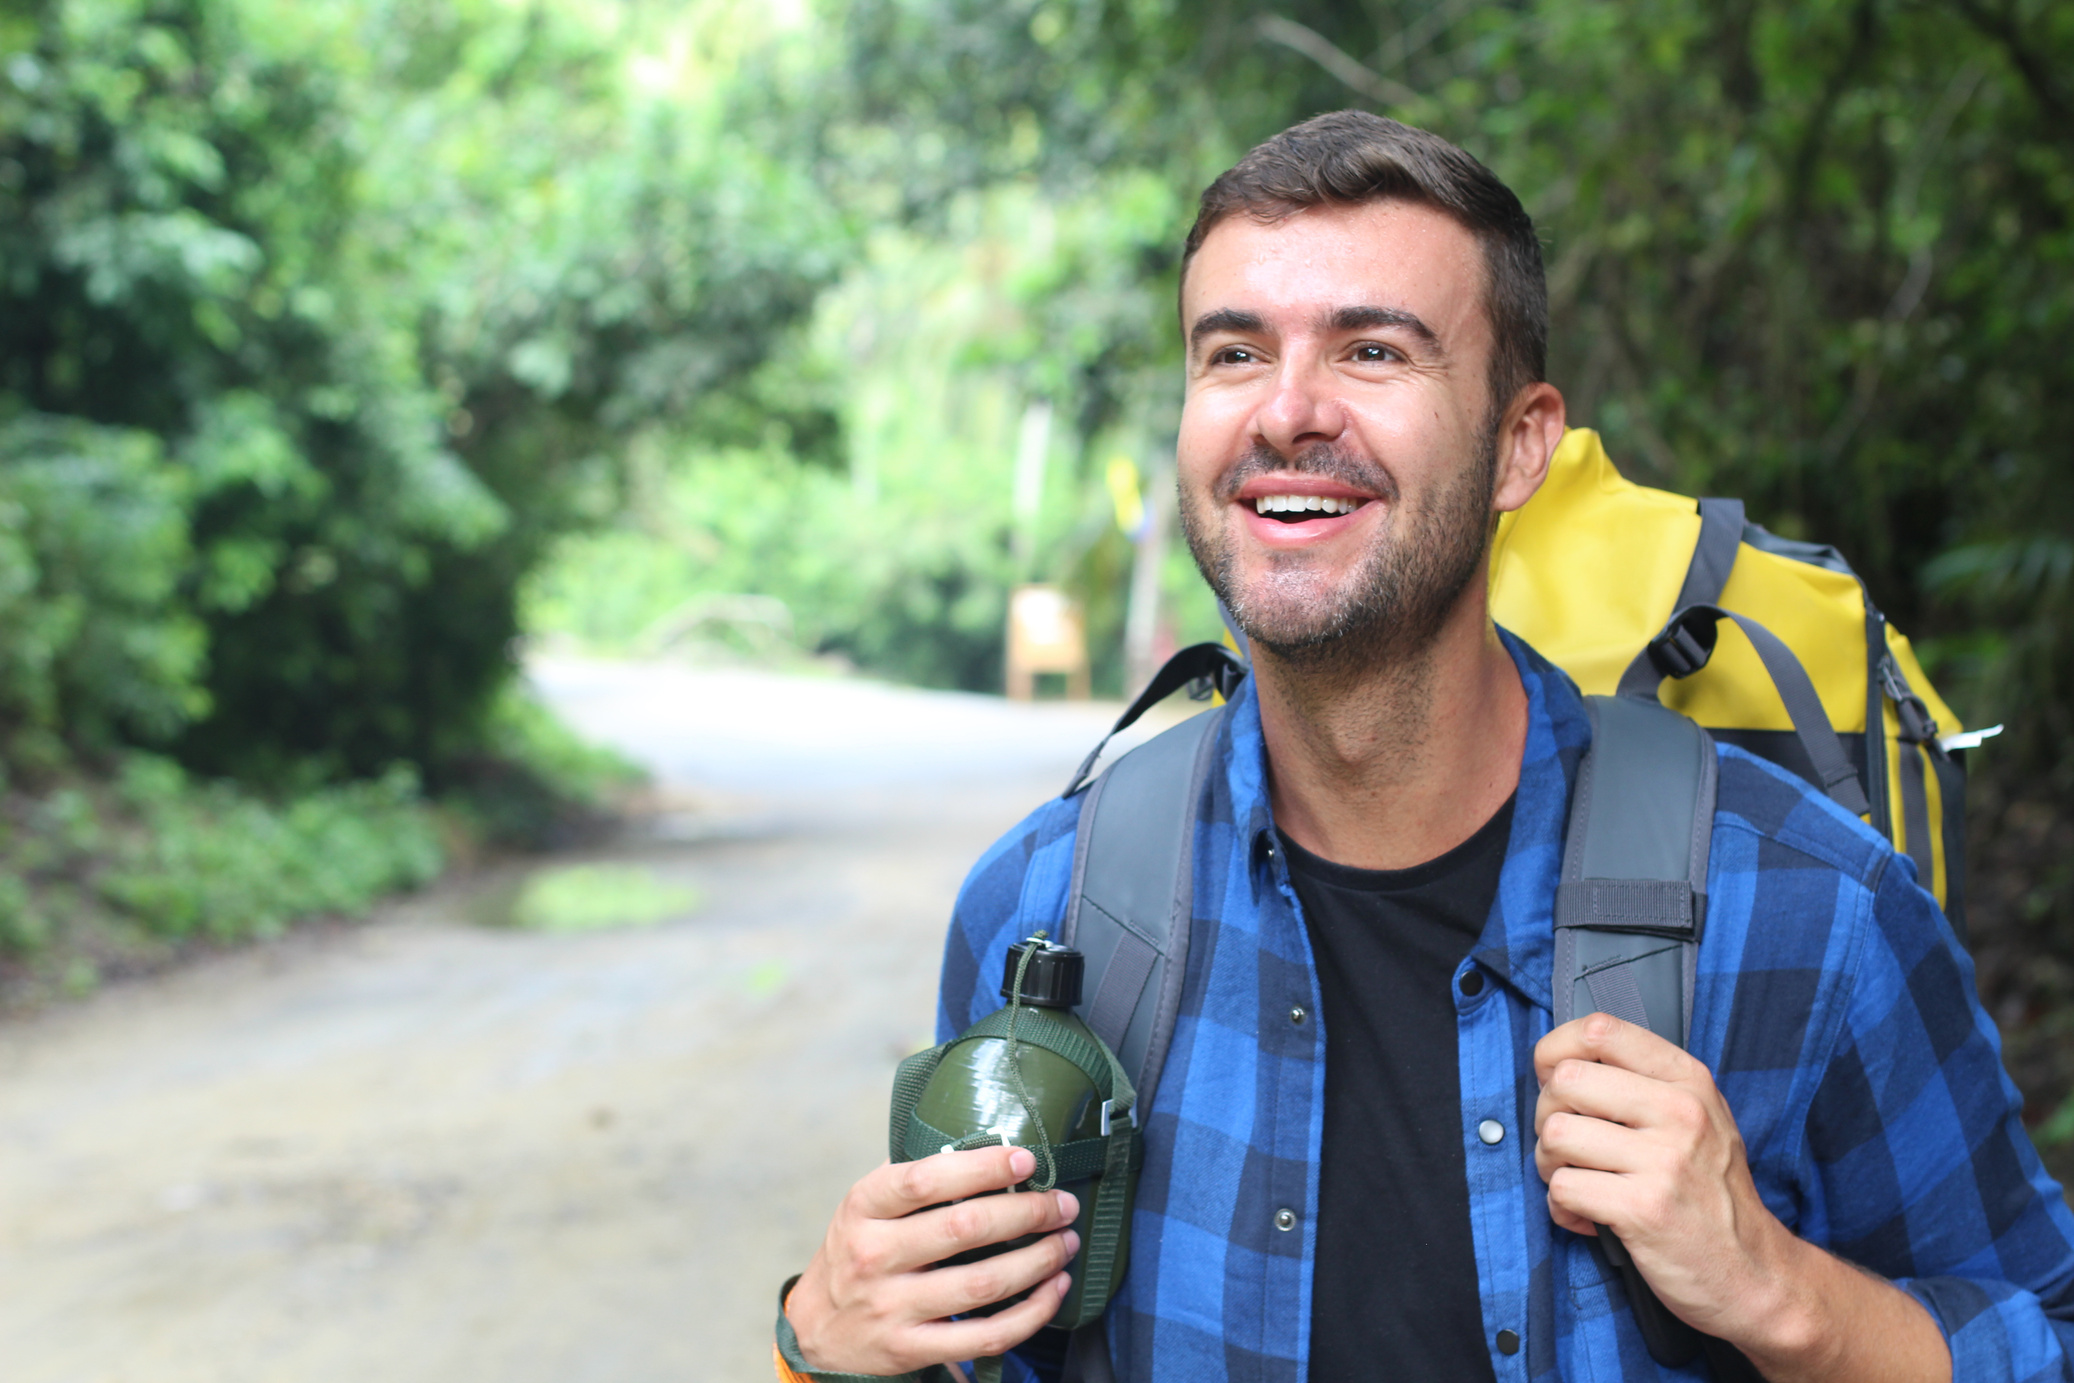 Healthy backpacker going through the jungle